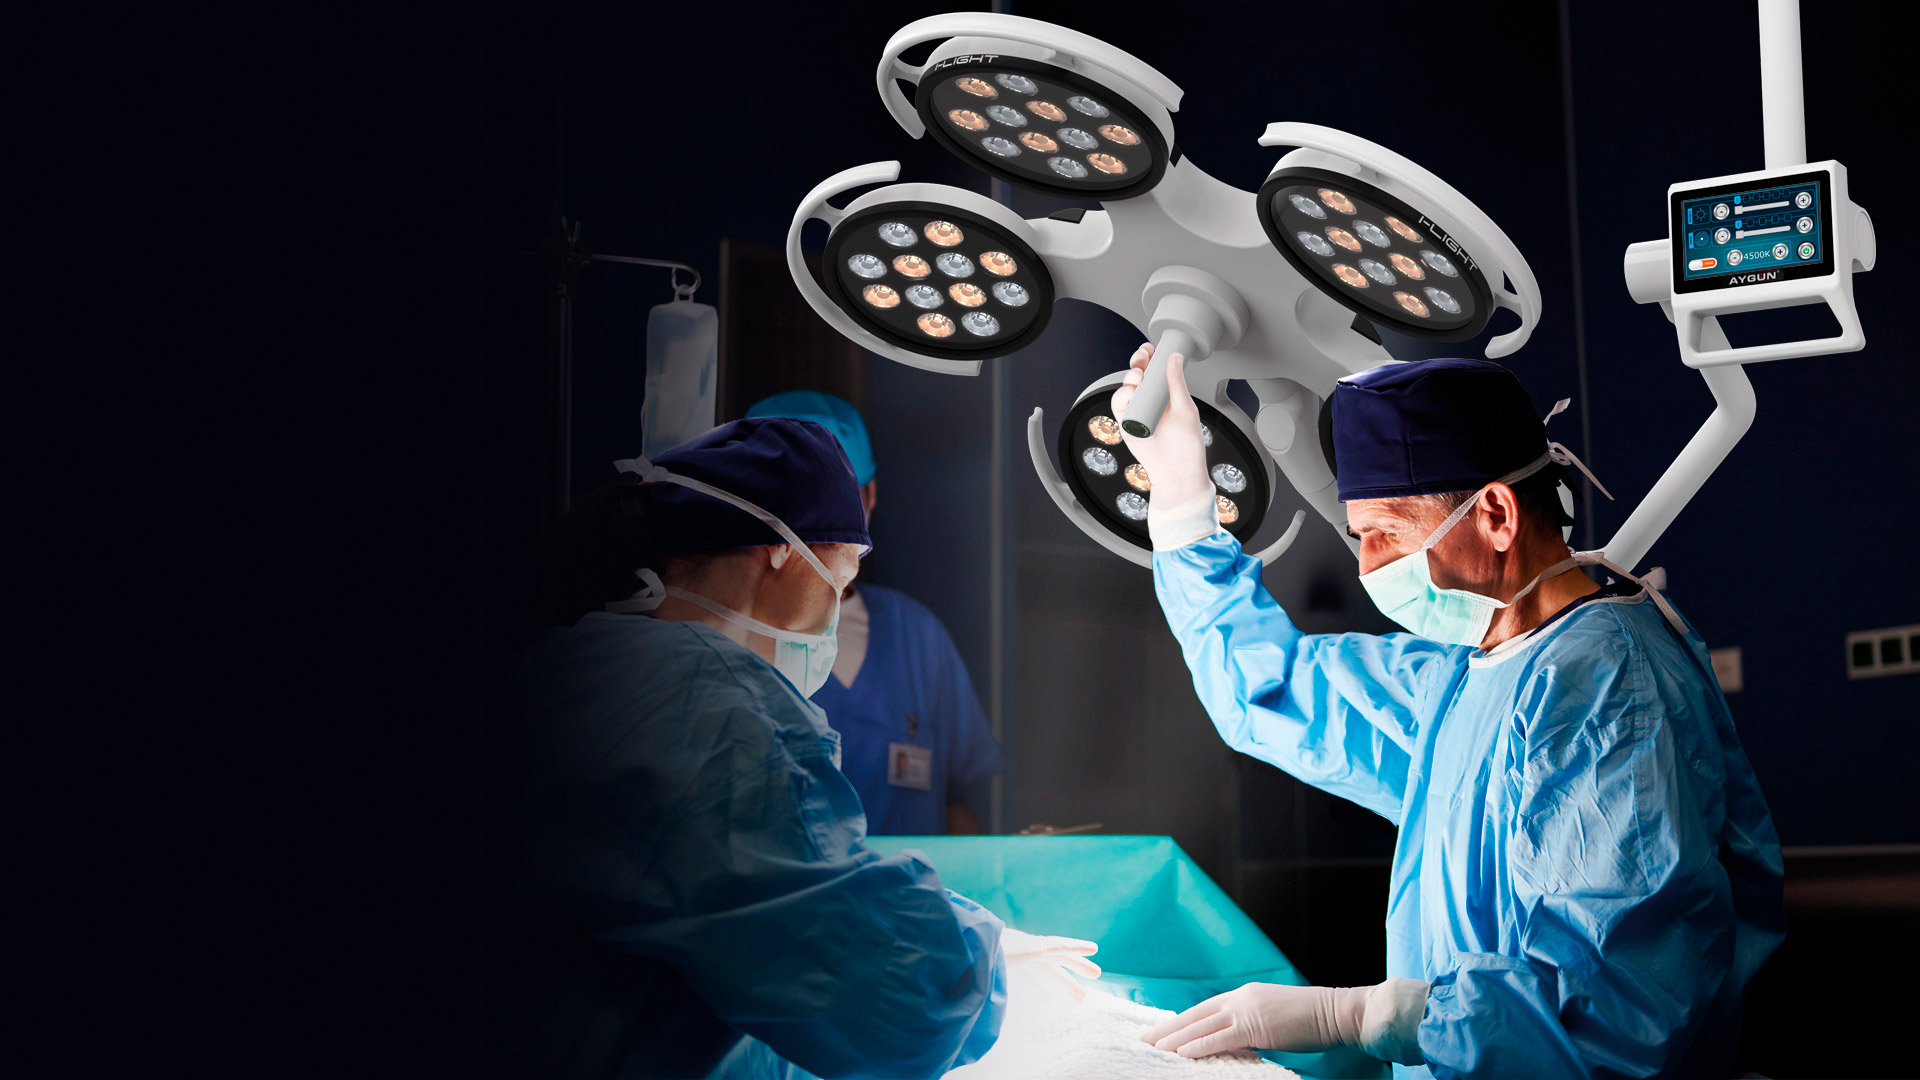 Aygun Surgical I-Light/Surgical Illumination Systems